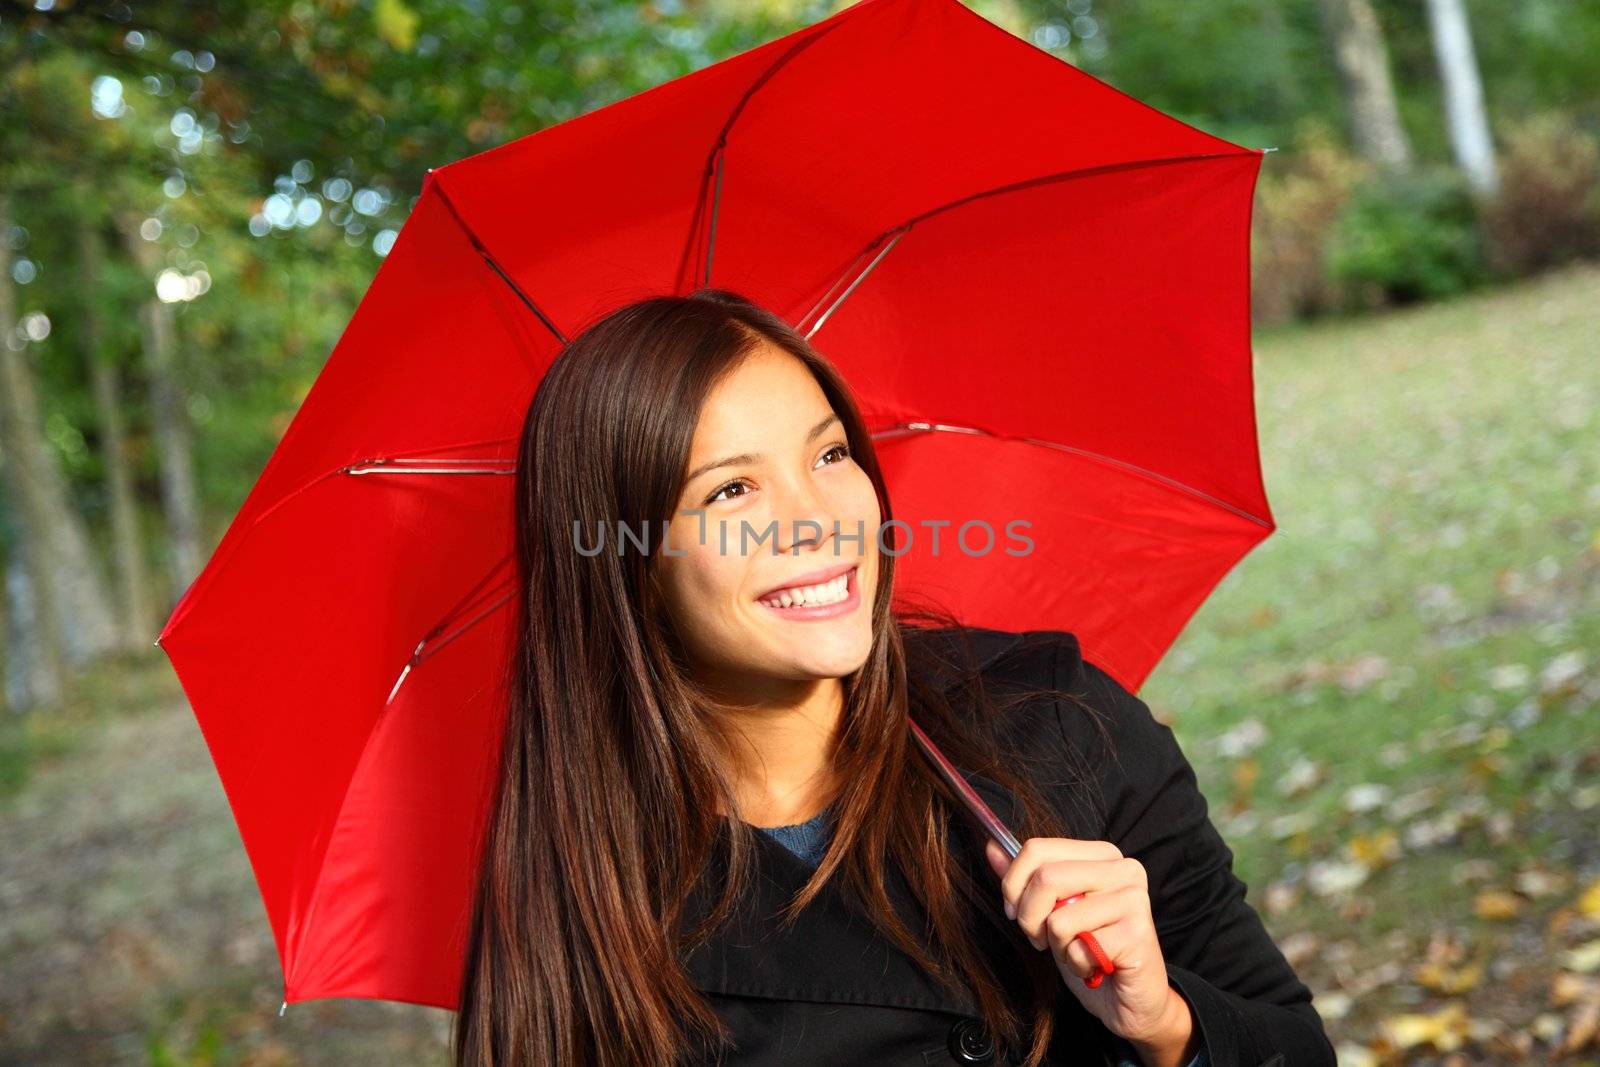 Red umbrella woman outdoors in autumn forest. Beautiful model.